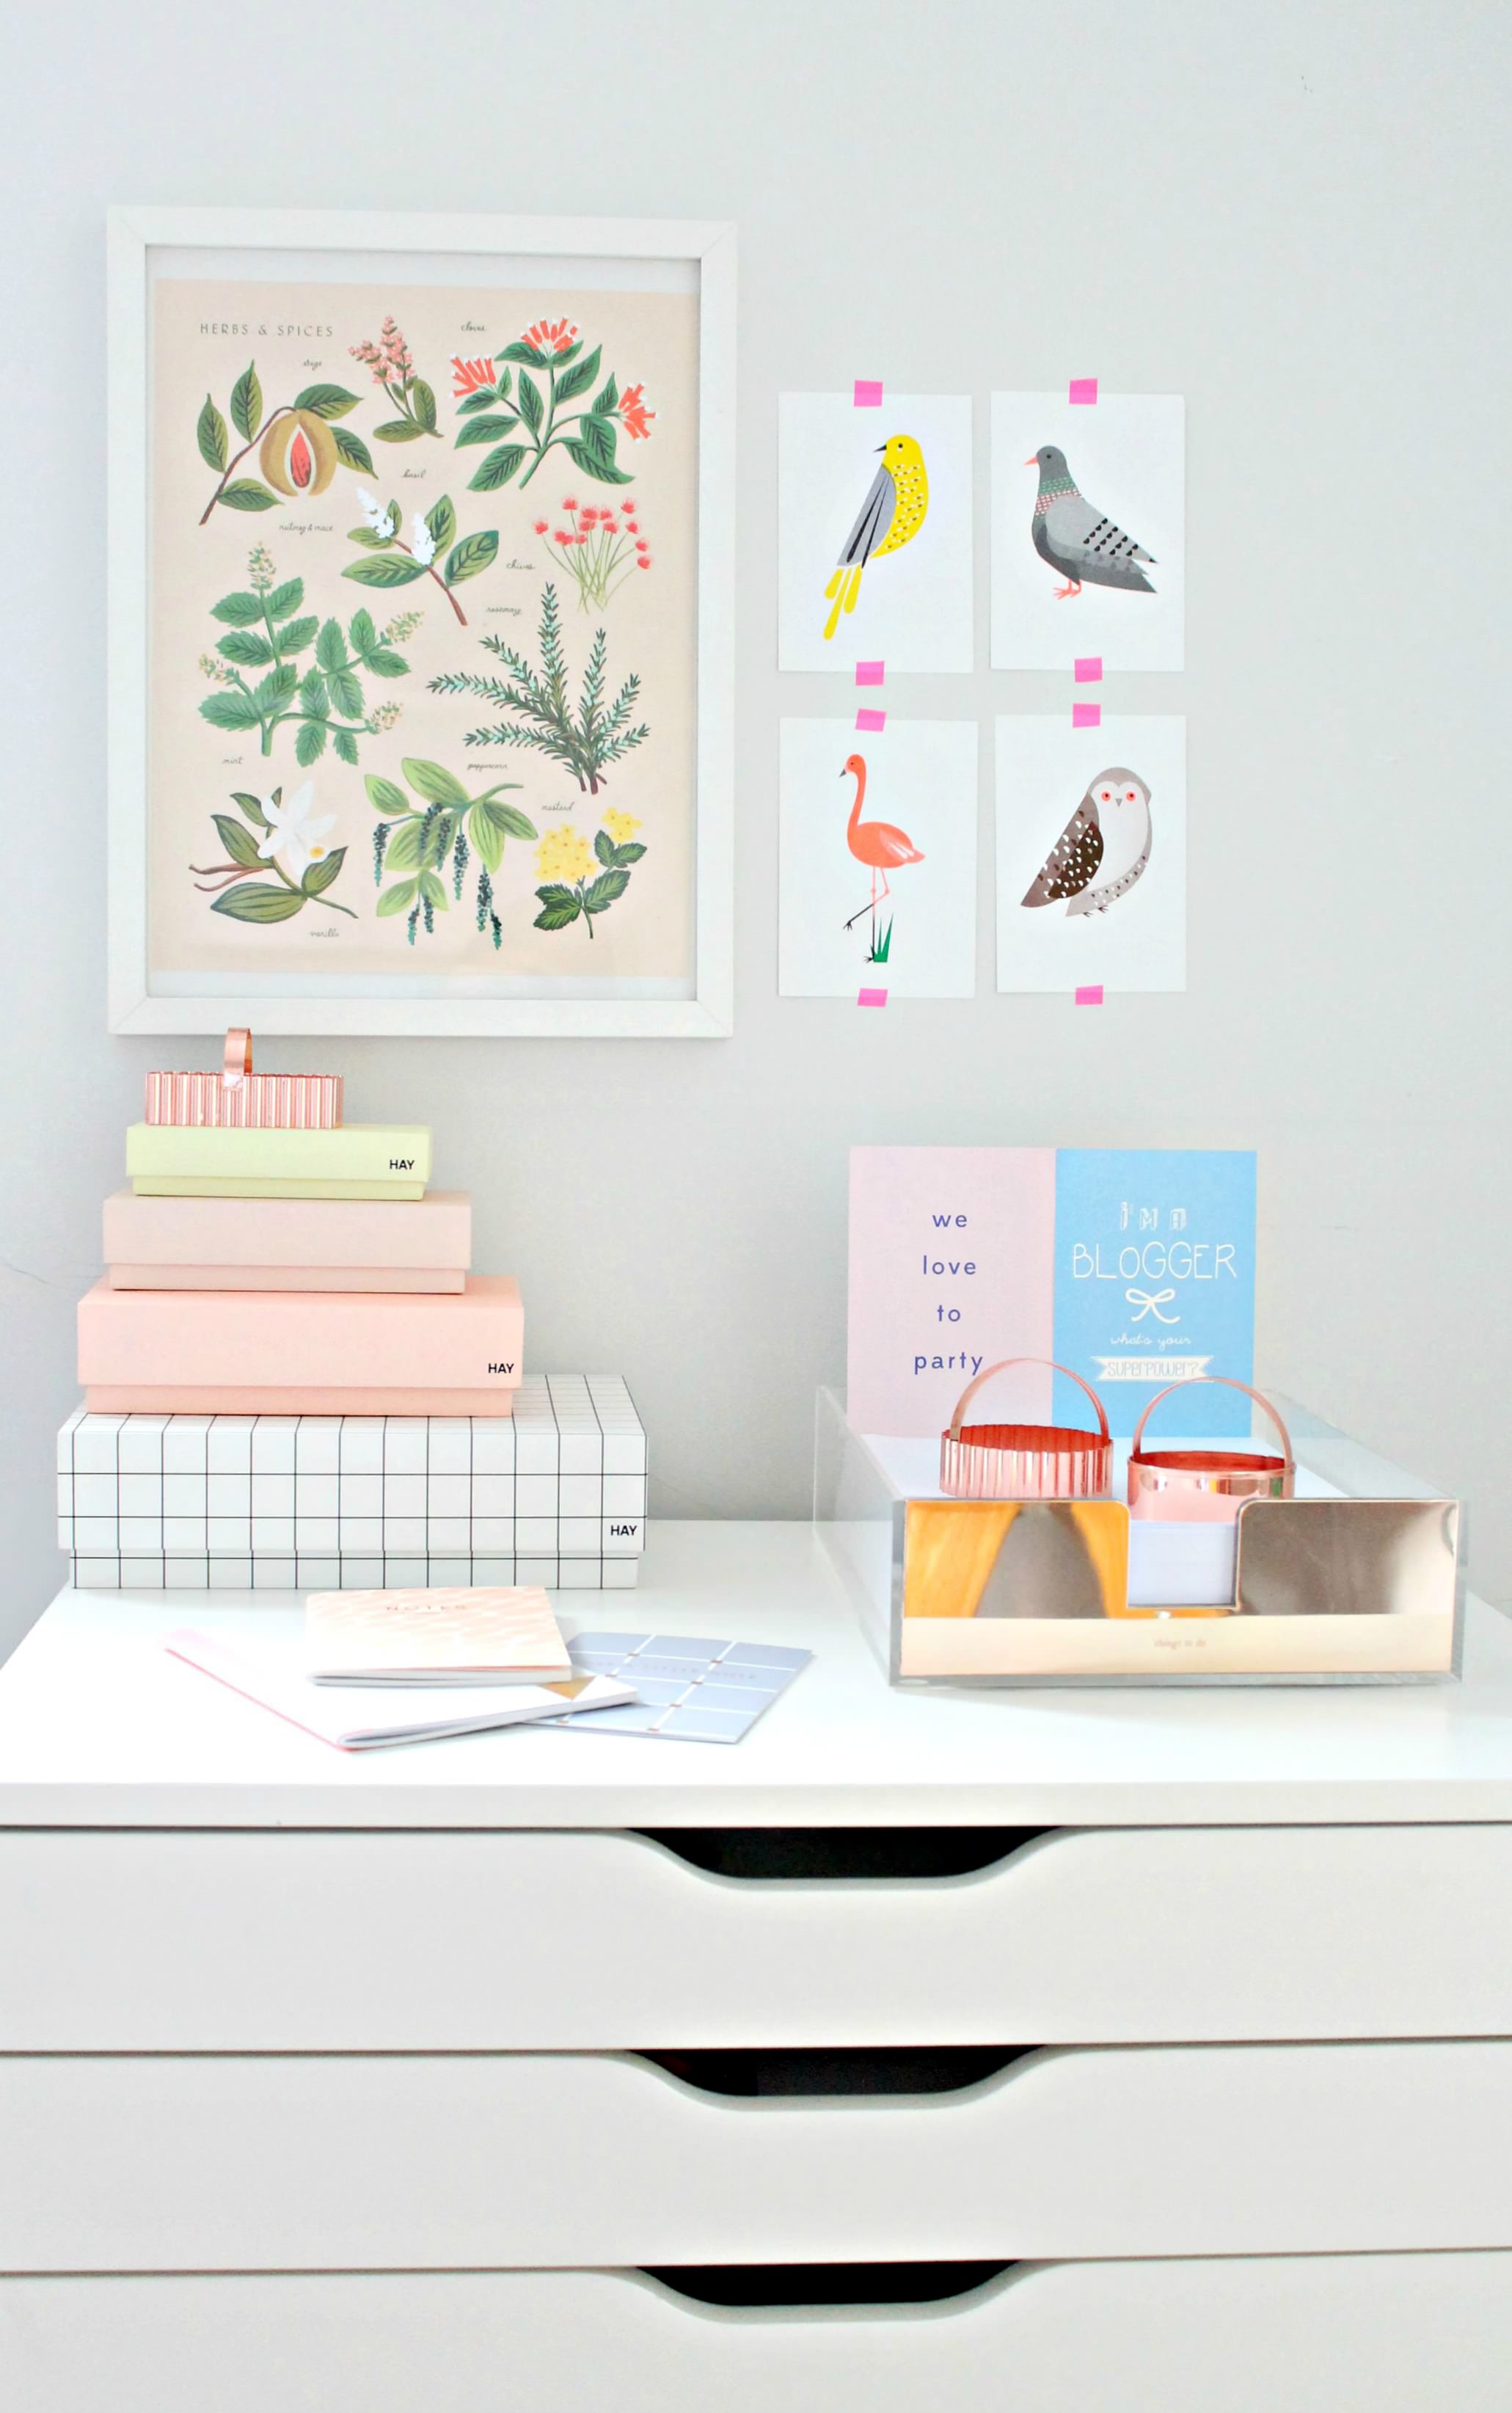 Little-Big-Bell-work-space-1-photo-and-styling-by-Geraldine-Tan